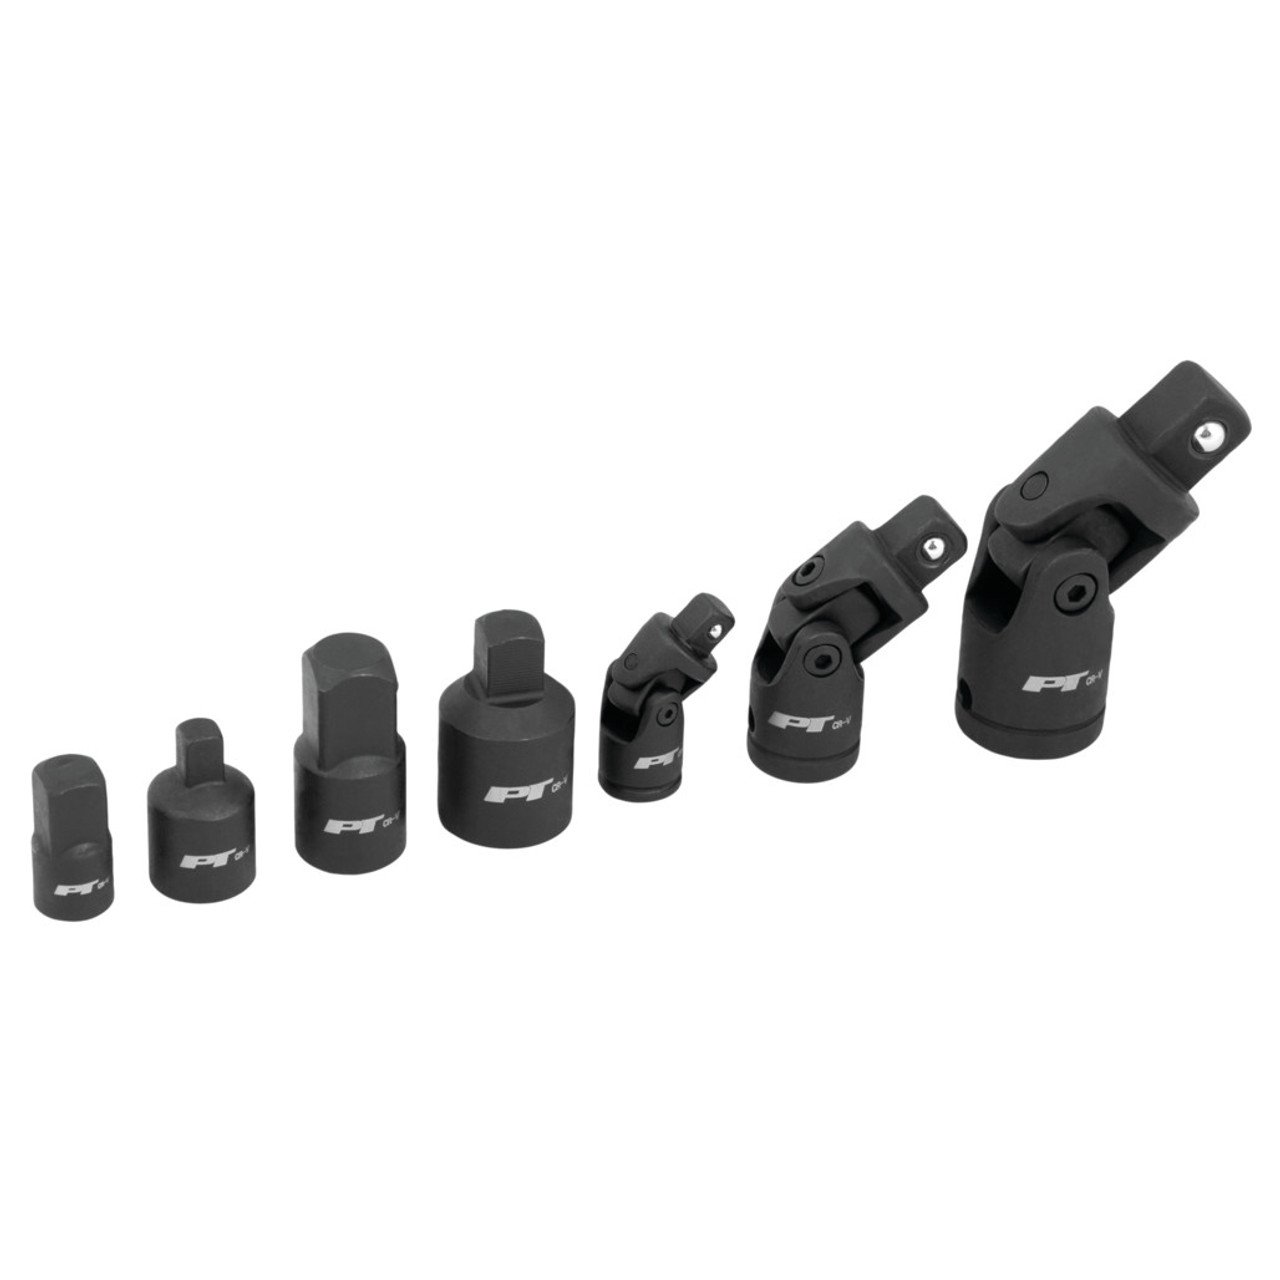 Impact Socket Adapter and U-Joint Socket Set, 1/4 in., 3/8 in. & 1/2 in. Drives [7-Piece, Black]